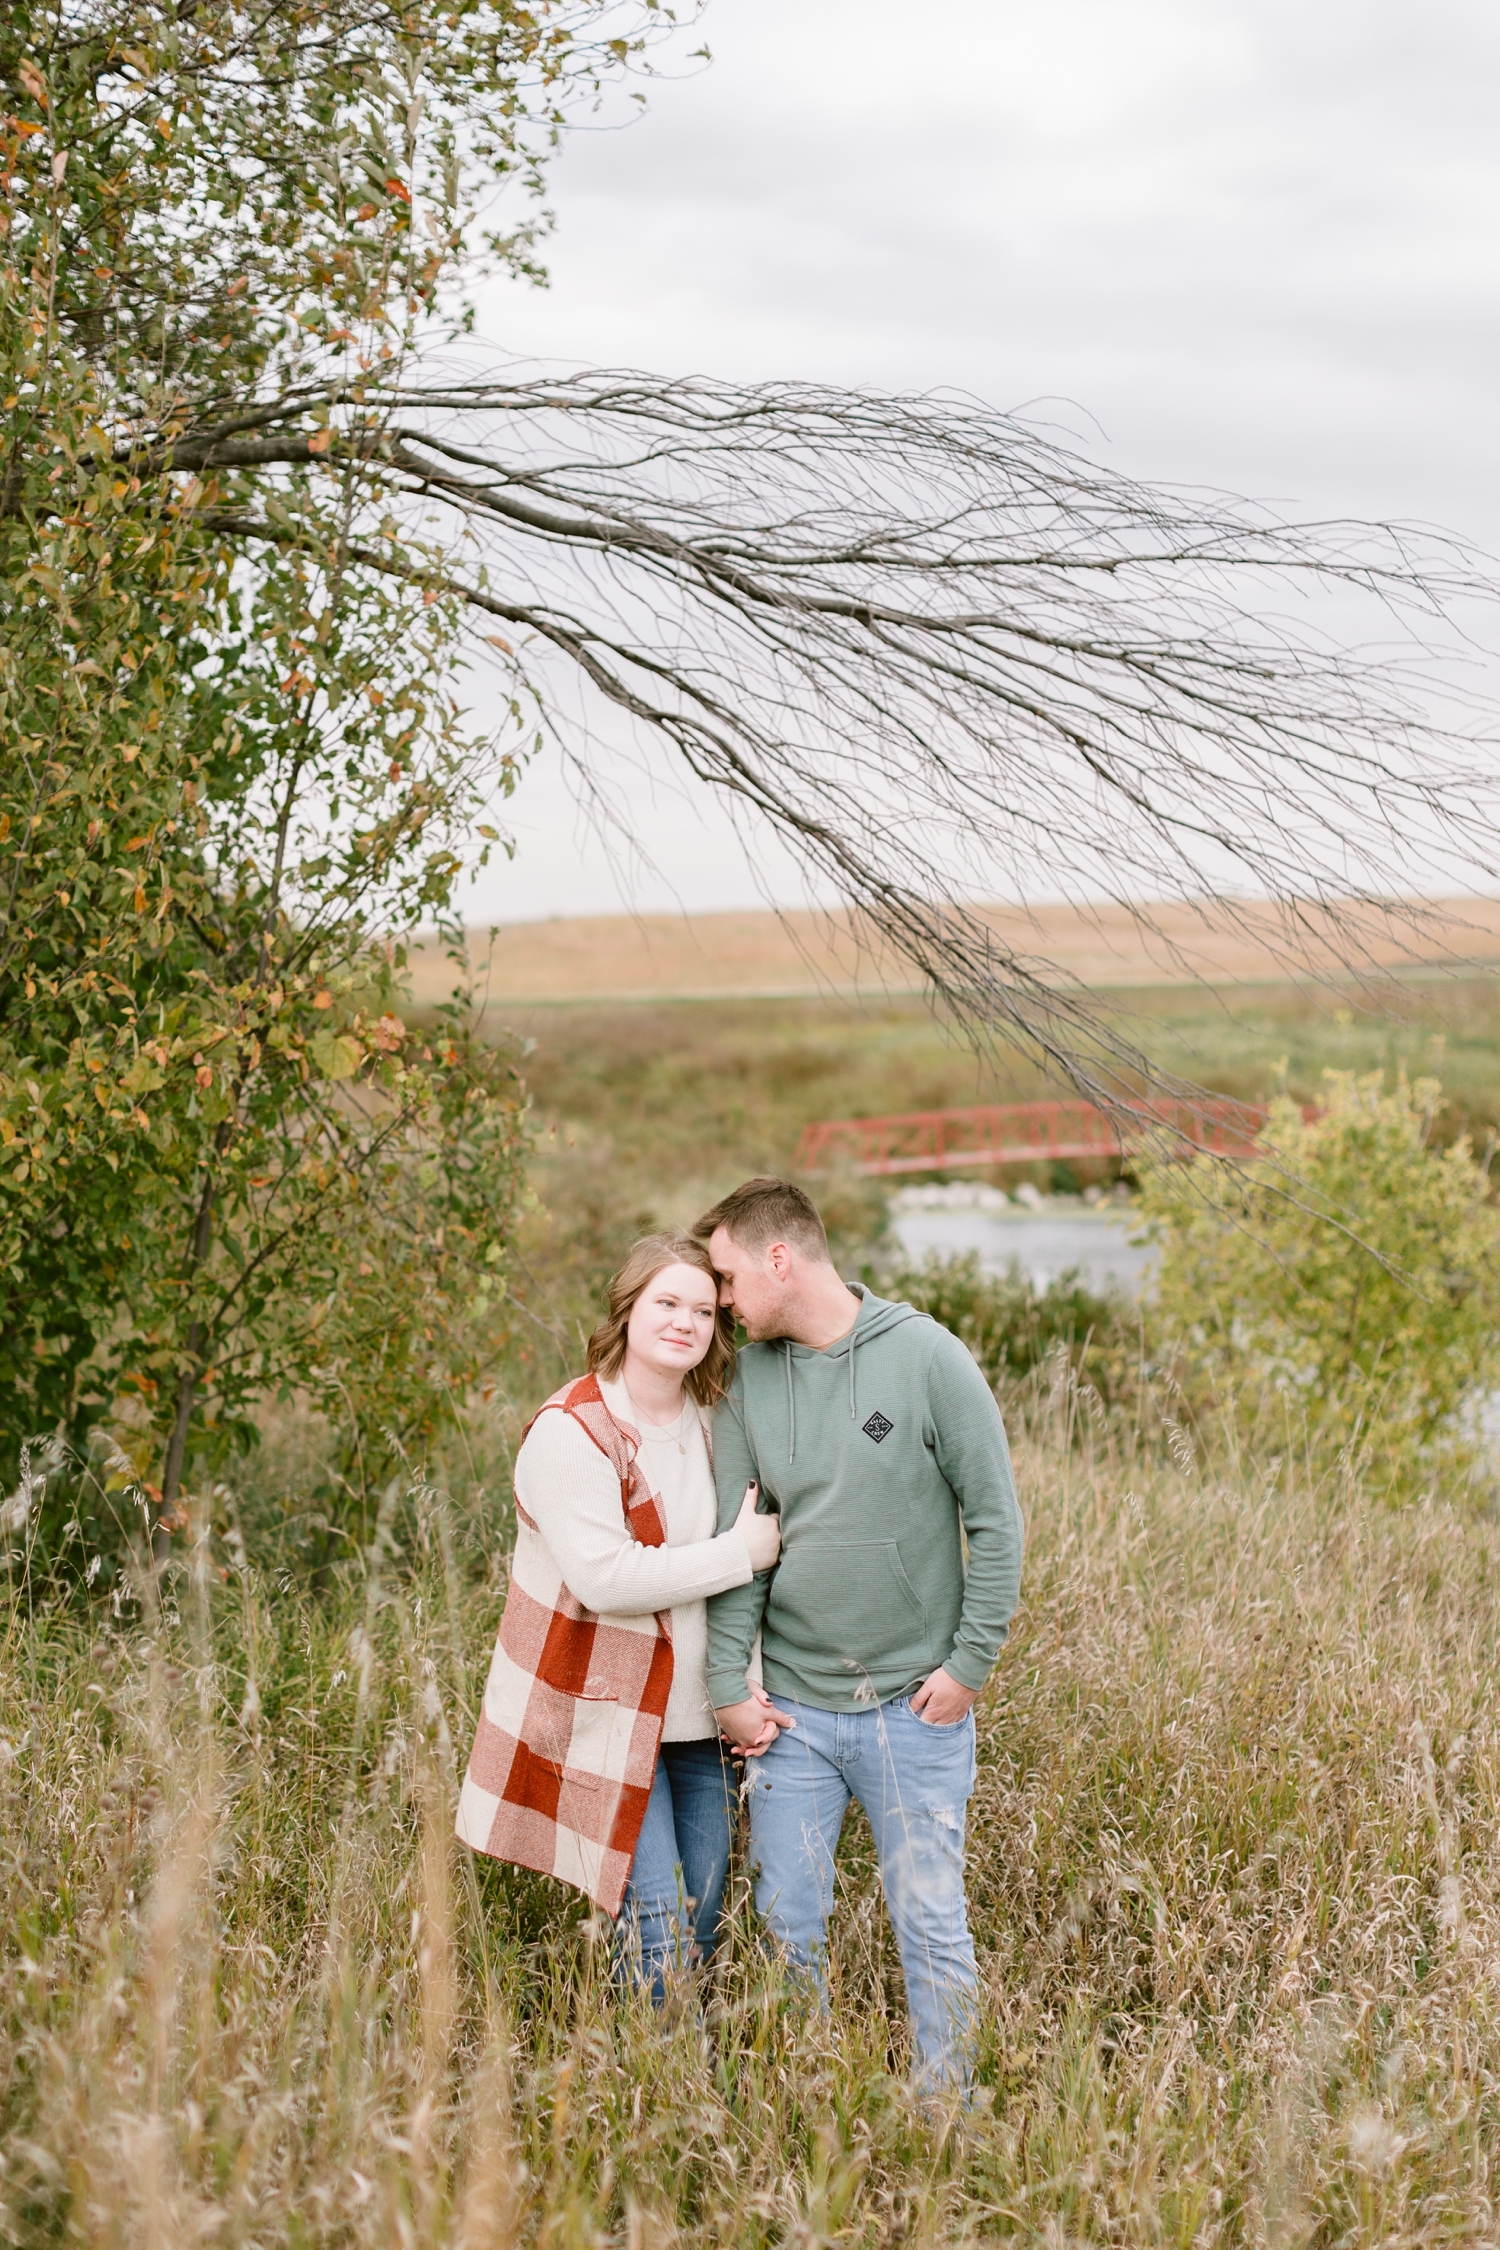 Justin nuzzles Kylie snuggle in the middle of a prairie grassy field with a red bridge in the background at Water's Edge Nature Center | CB Studio